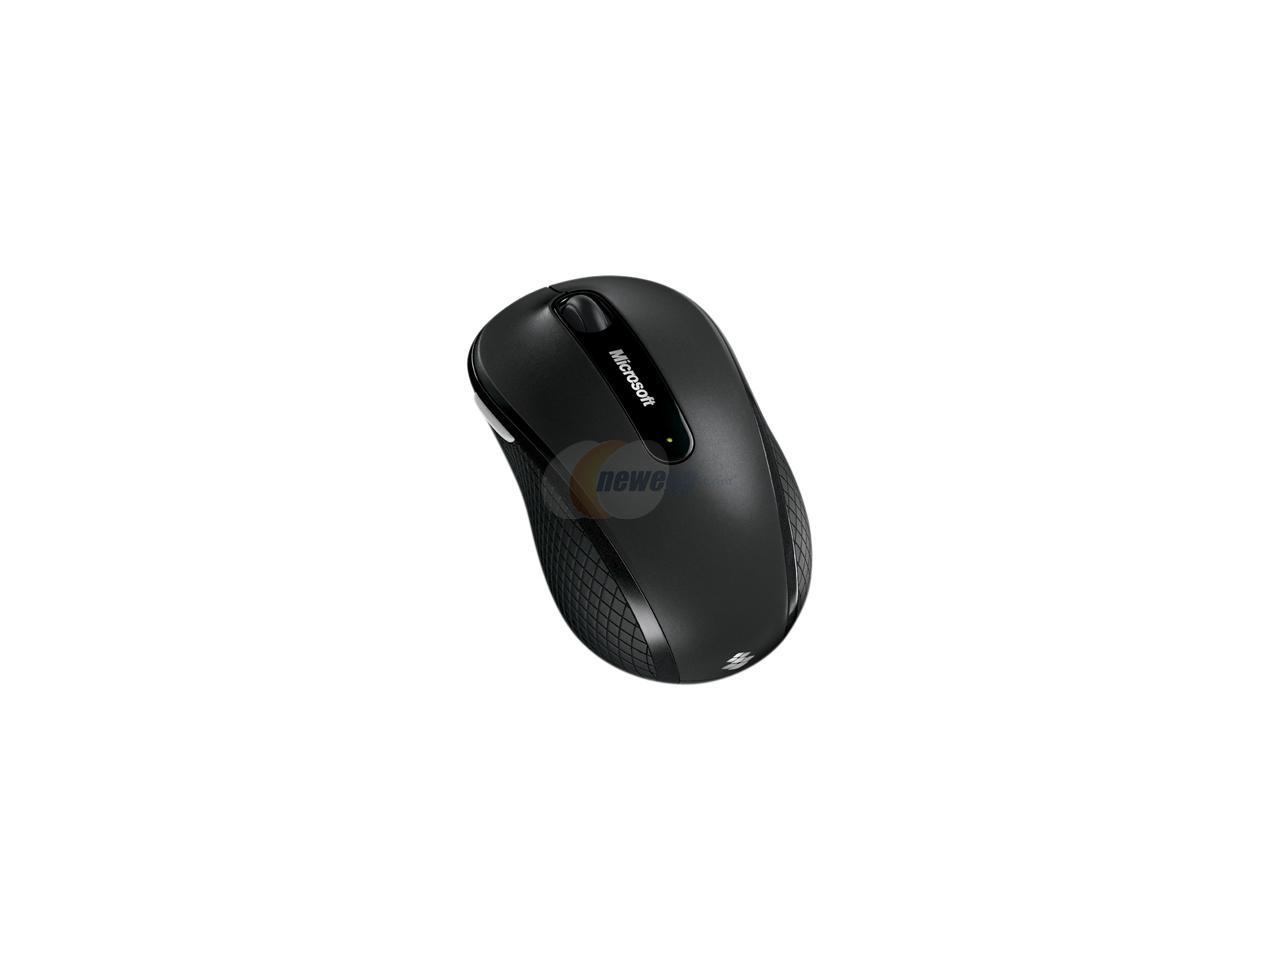 microsoft wireless mobile mouse 4000 for mac driver